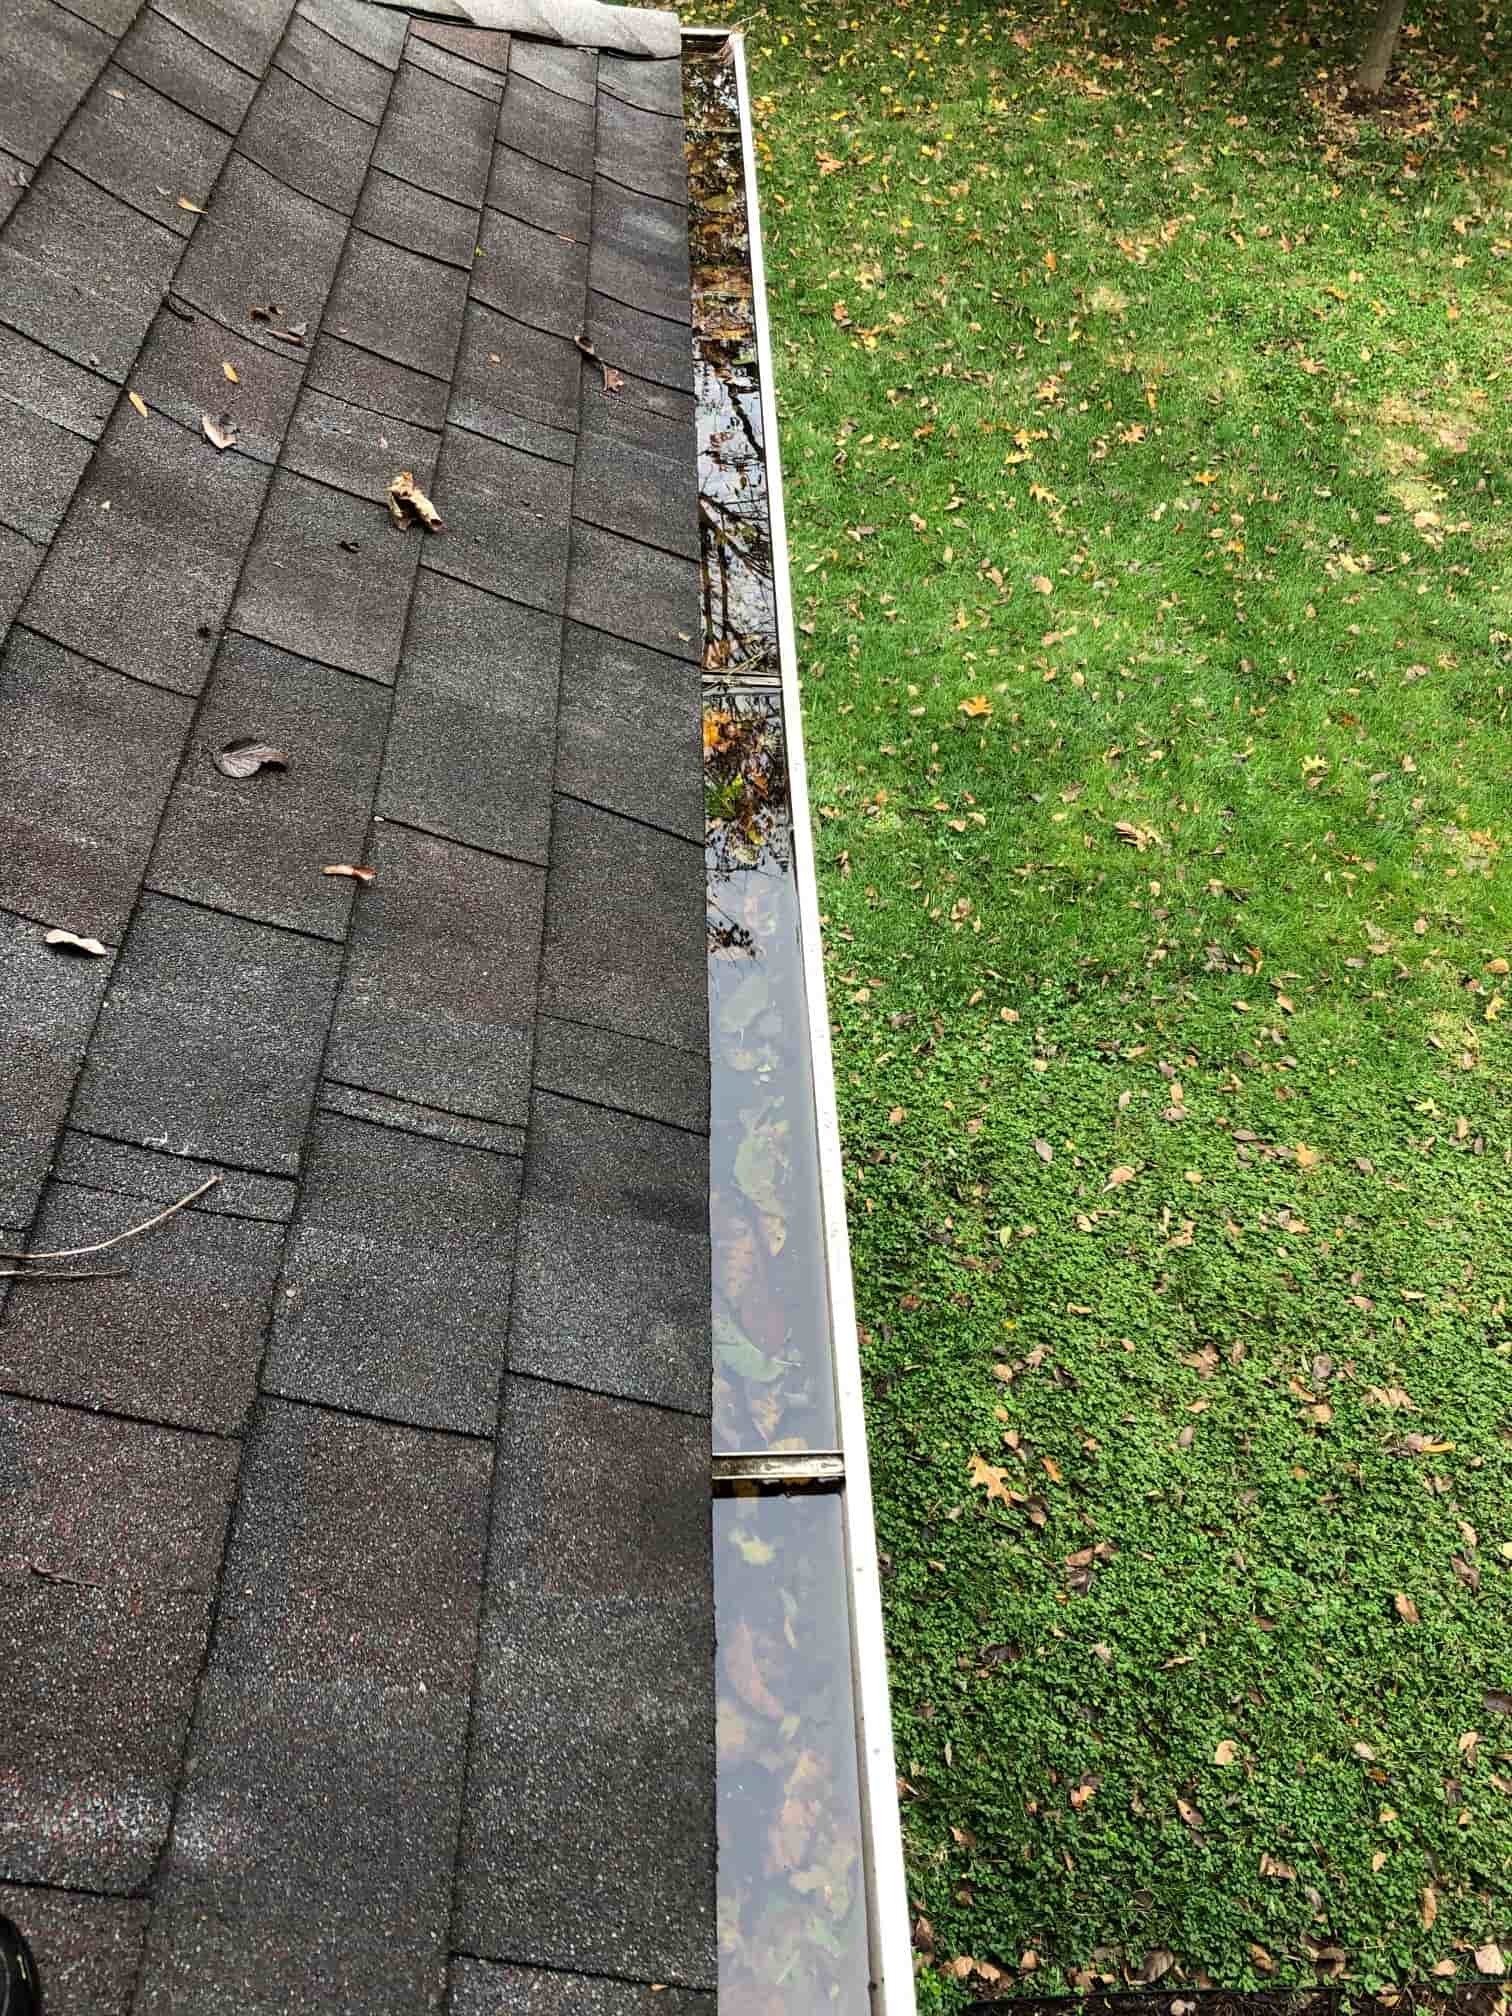 gutter cleaning from ground